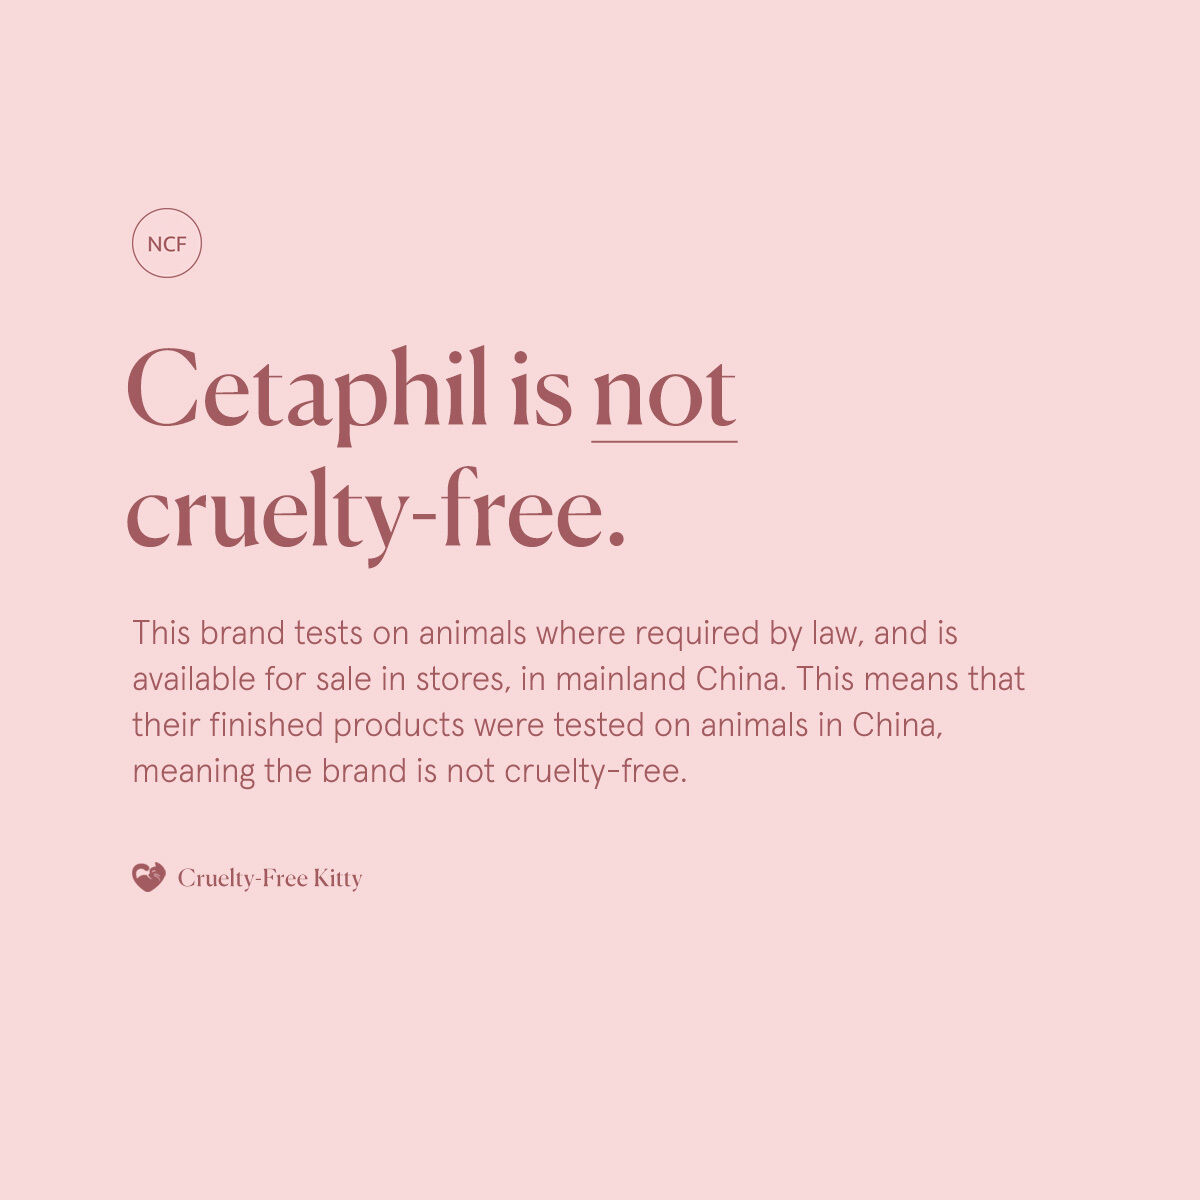 fjerkræ overskæg hoste Cruelty-Free Kitty on Twitter: "Unfortunately, Cetaphil is not a cruelty- free brand. ❌ However, you can find gentle alternatives that are suitable  for the most sensitive skin from other brands including Acure, Ceramedx,